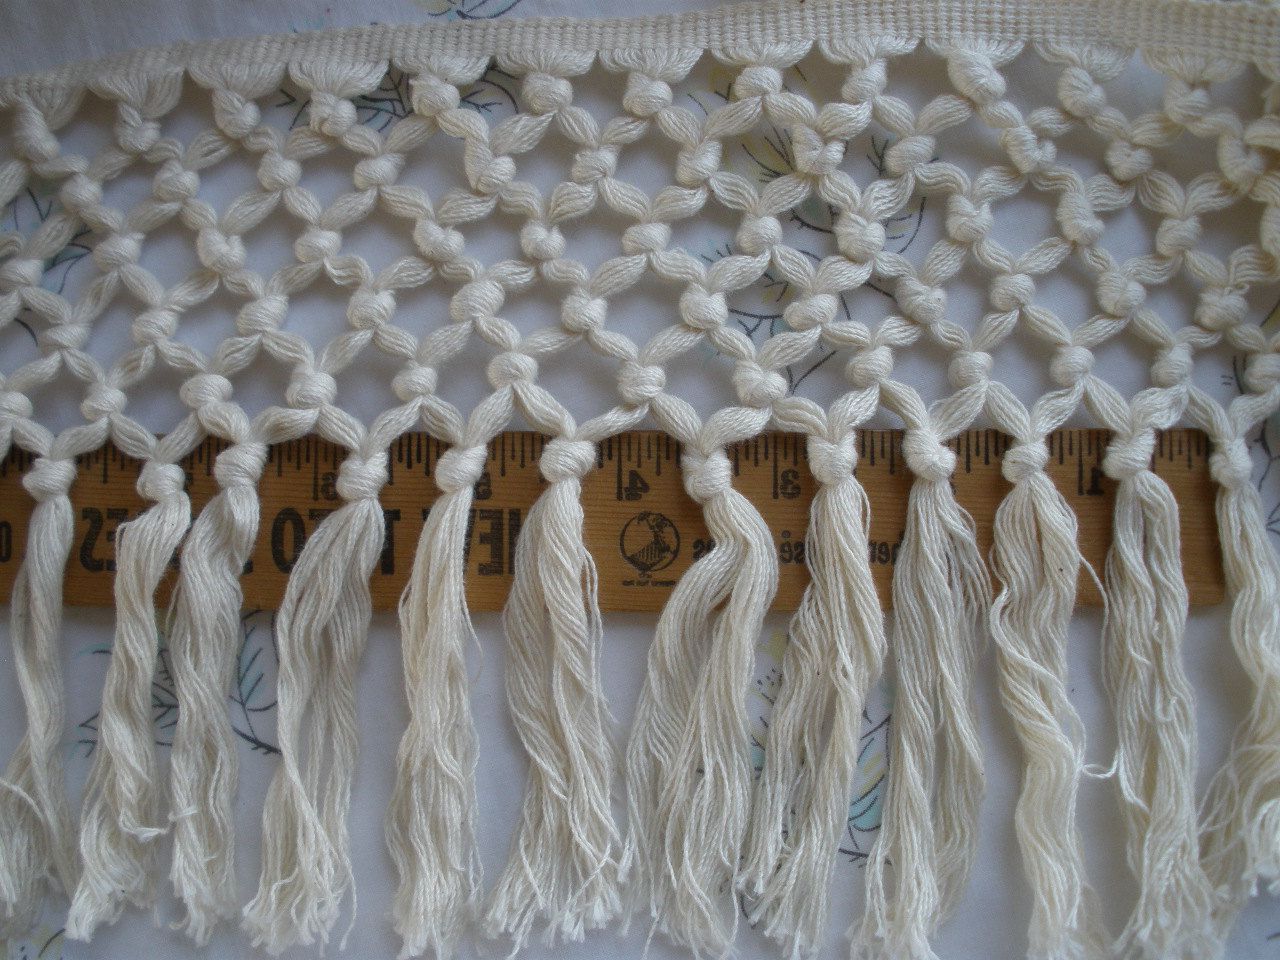 Widely Used Blended Fabric Fringed Design Woven With Rod Intended For Boho Macrame Fringe Trim 6 Wide Cotton Blend Knotted (View 5 of 20)